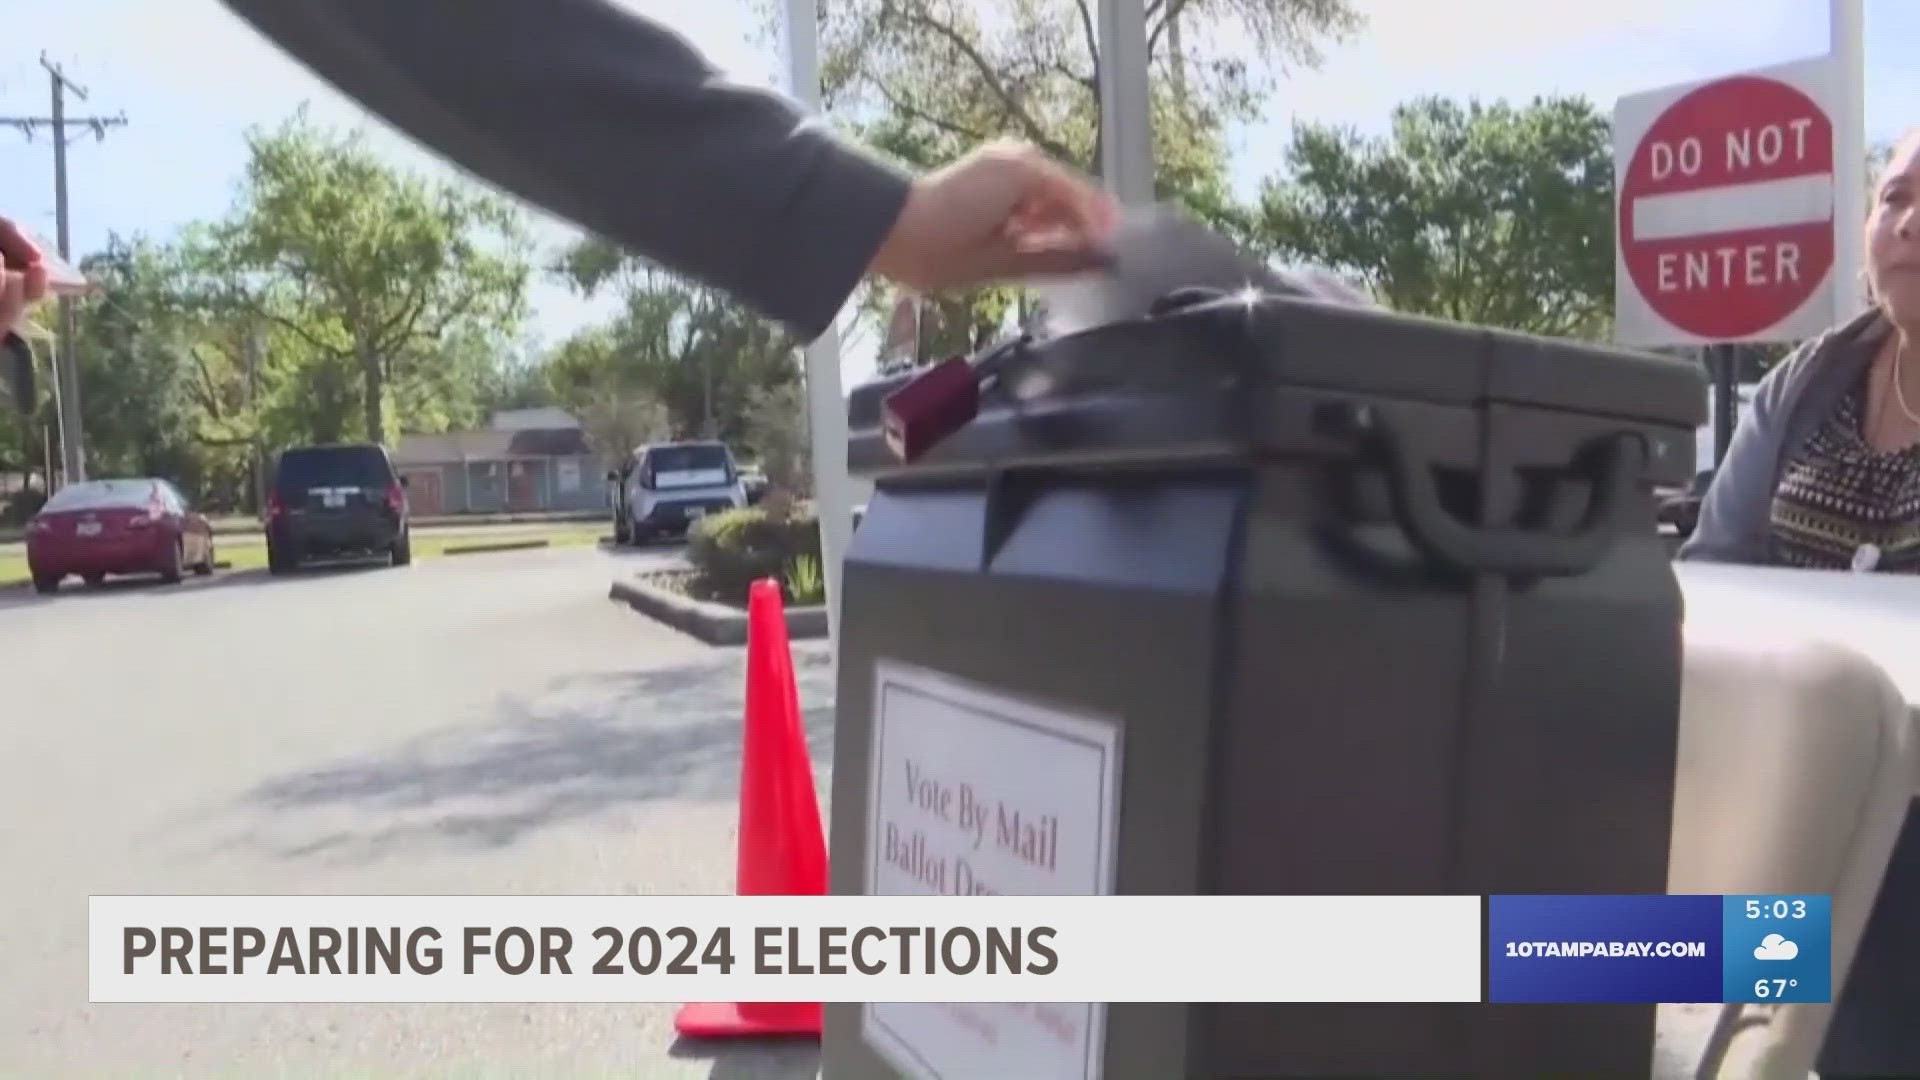 A Florida law now requires a vote-by-mail ballot application after each general election cycle.